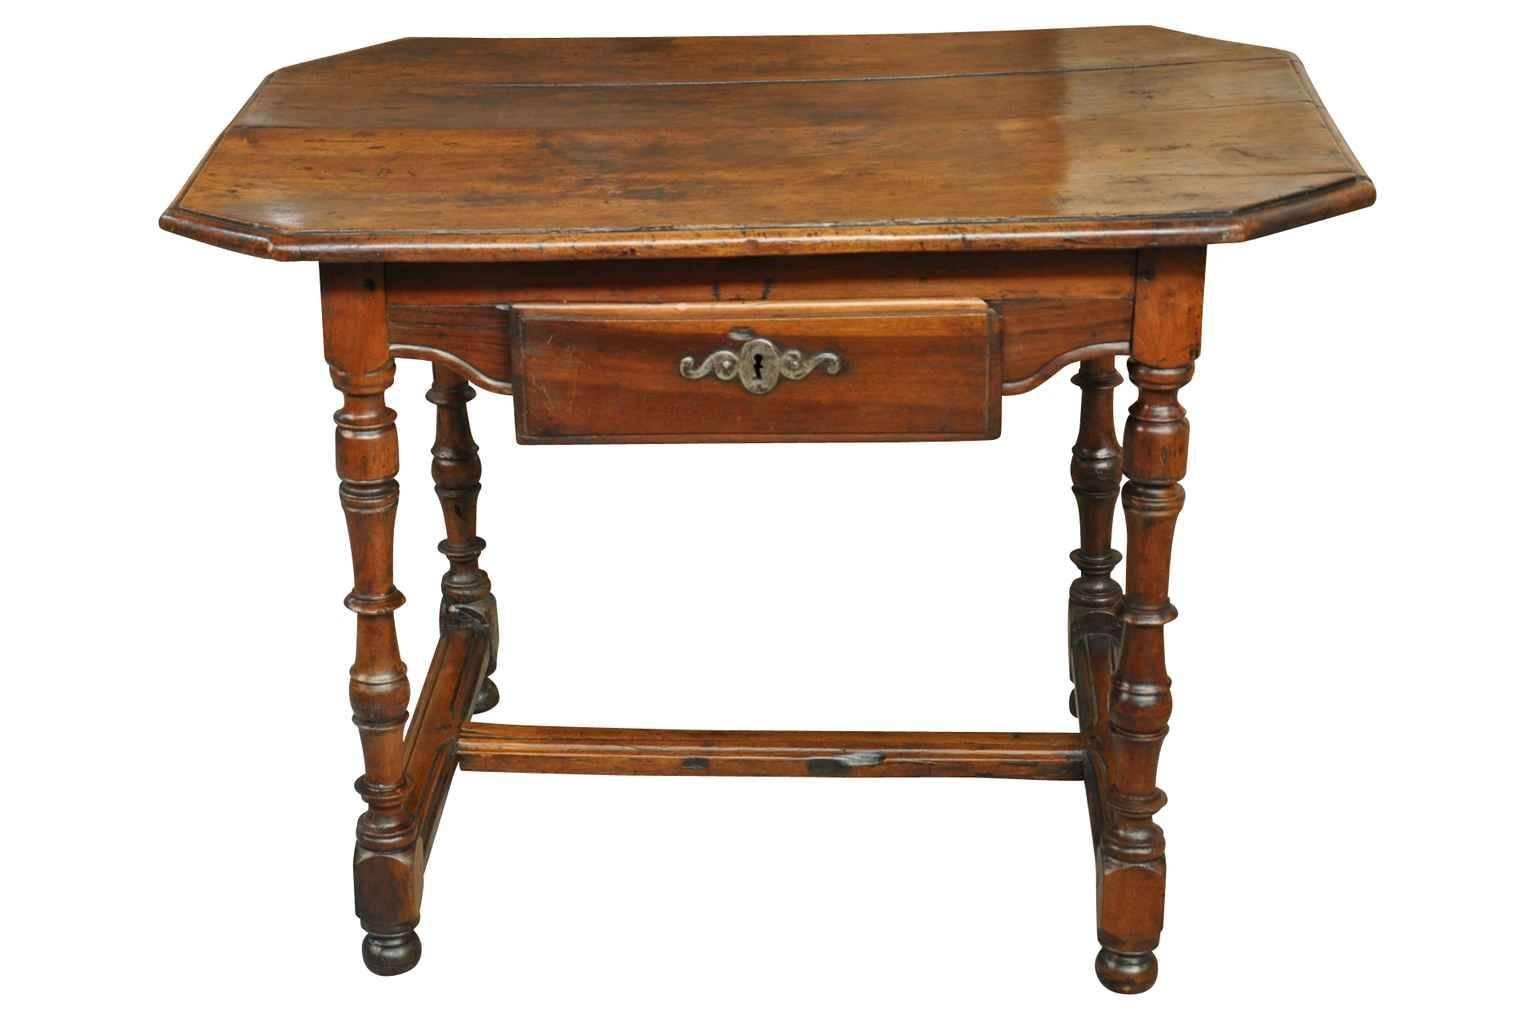 A charming later 19th century Louis XIII style writing table or side table from France. Beautifully constructed from walnut with a handsomely shaped top, single drawer and turned legs. Wonderful patina.